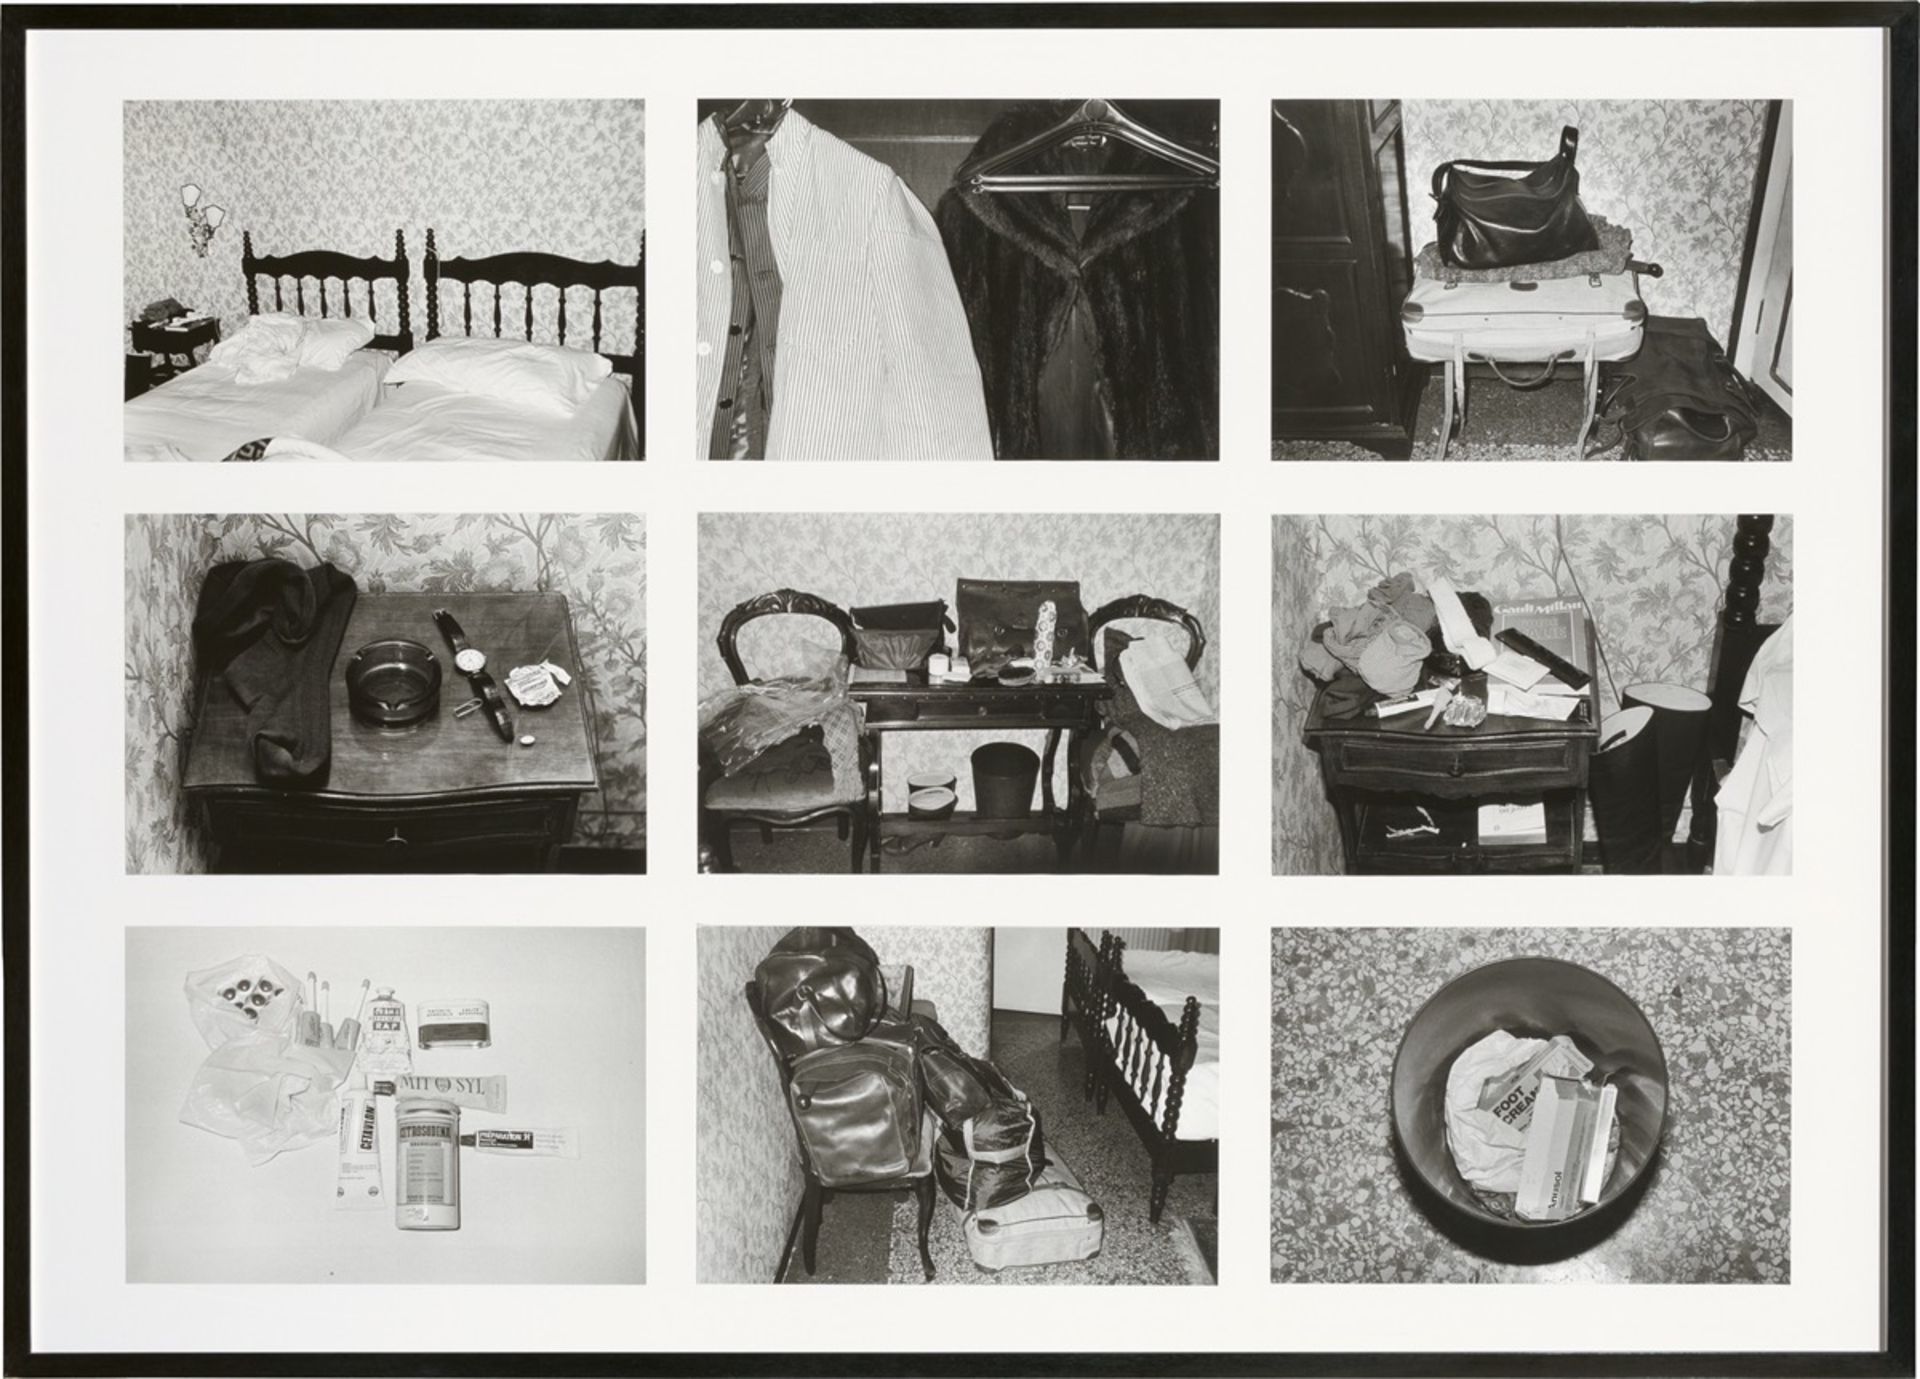 Sophie Calle. ”L’Hôtel – Room 29, 19 February”, from the series ”L’Hotel”. 1981–1983 - Image 2 of 3